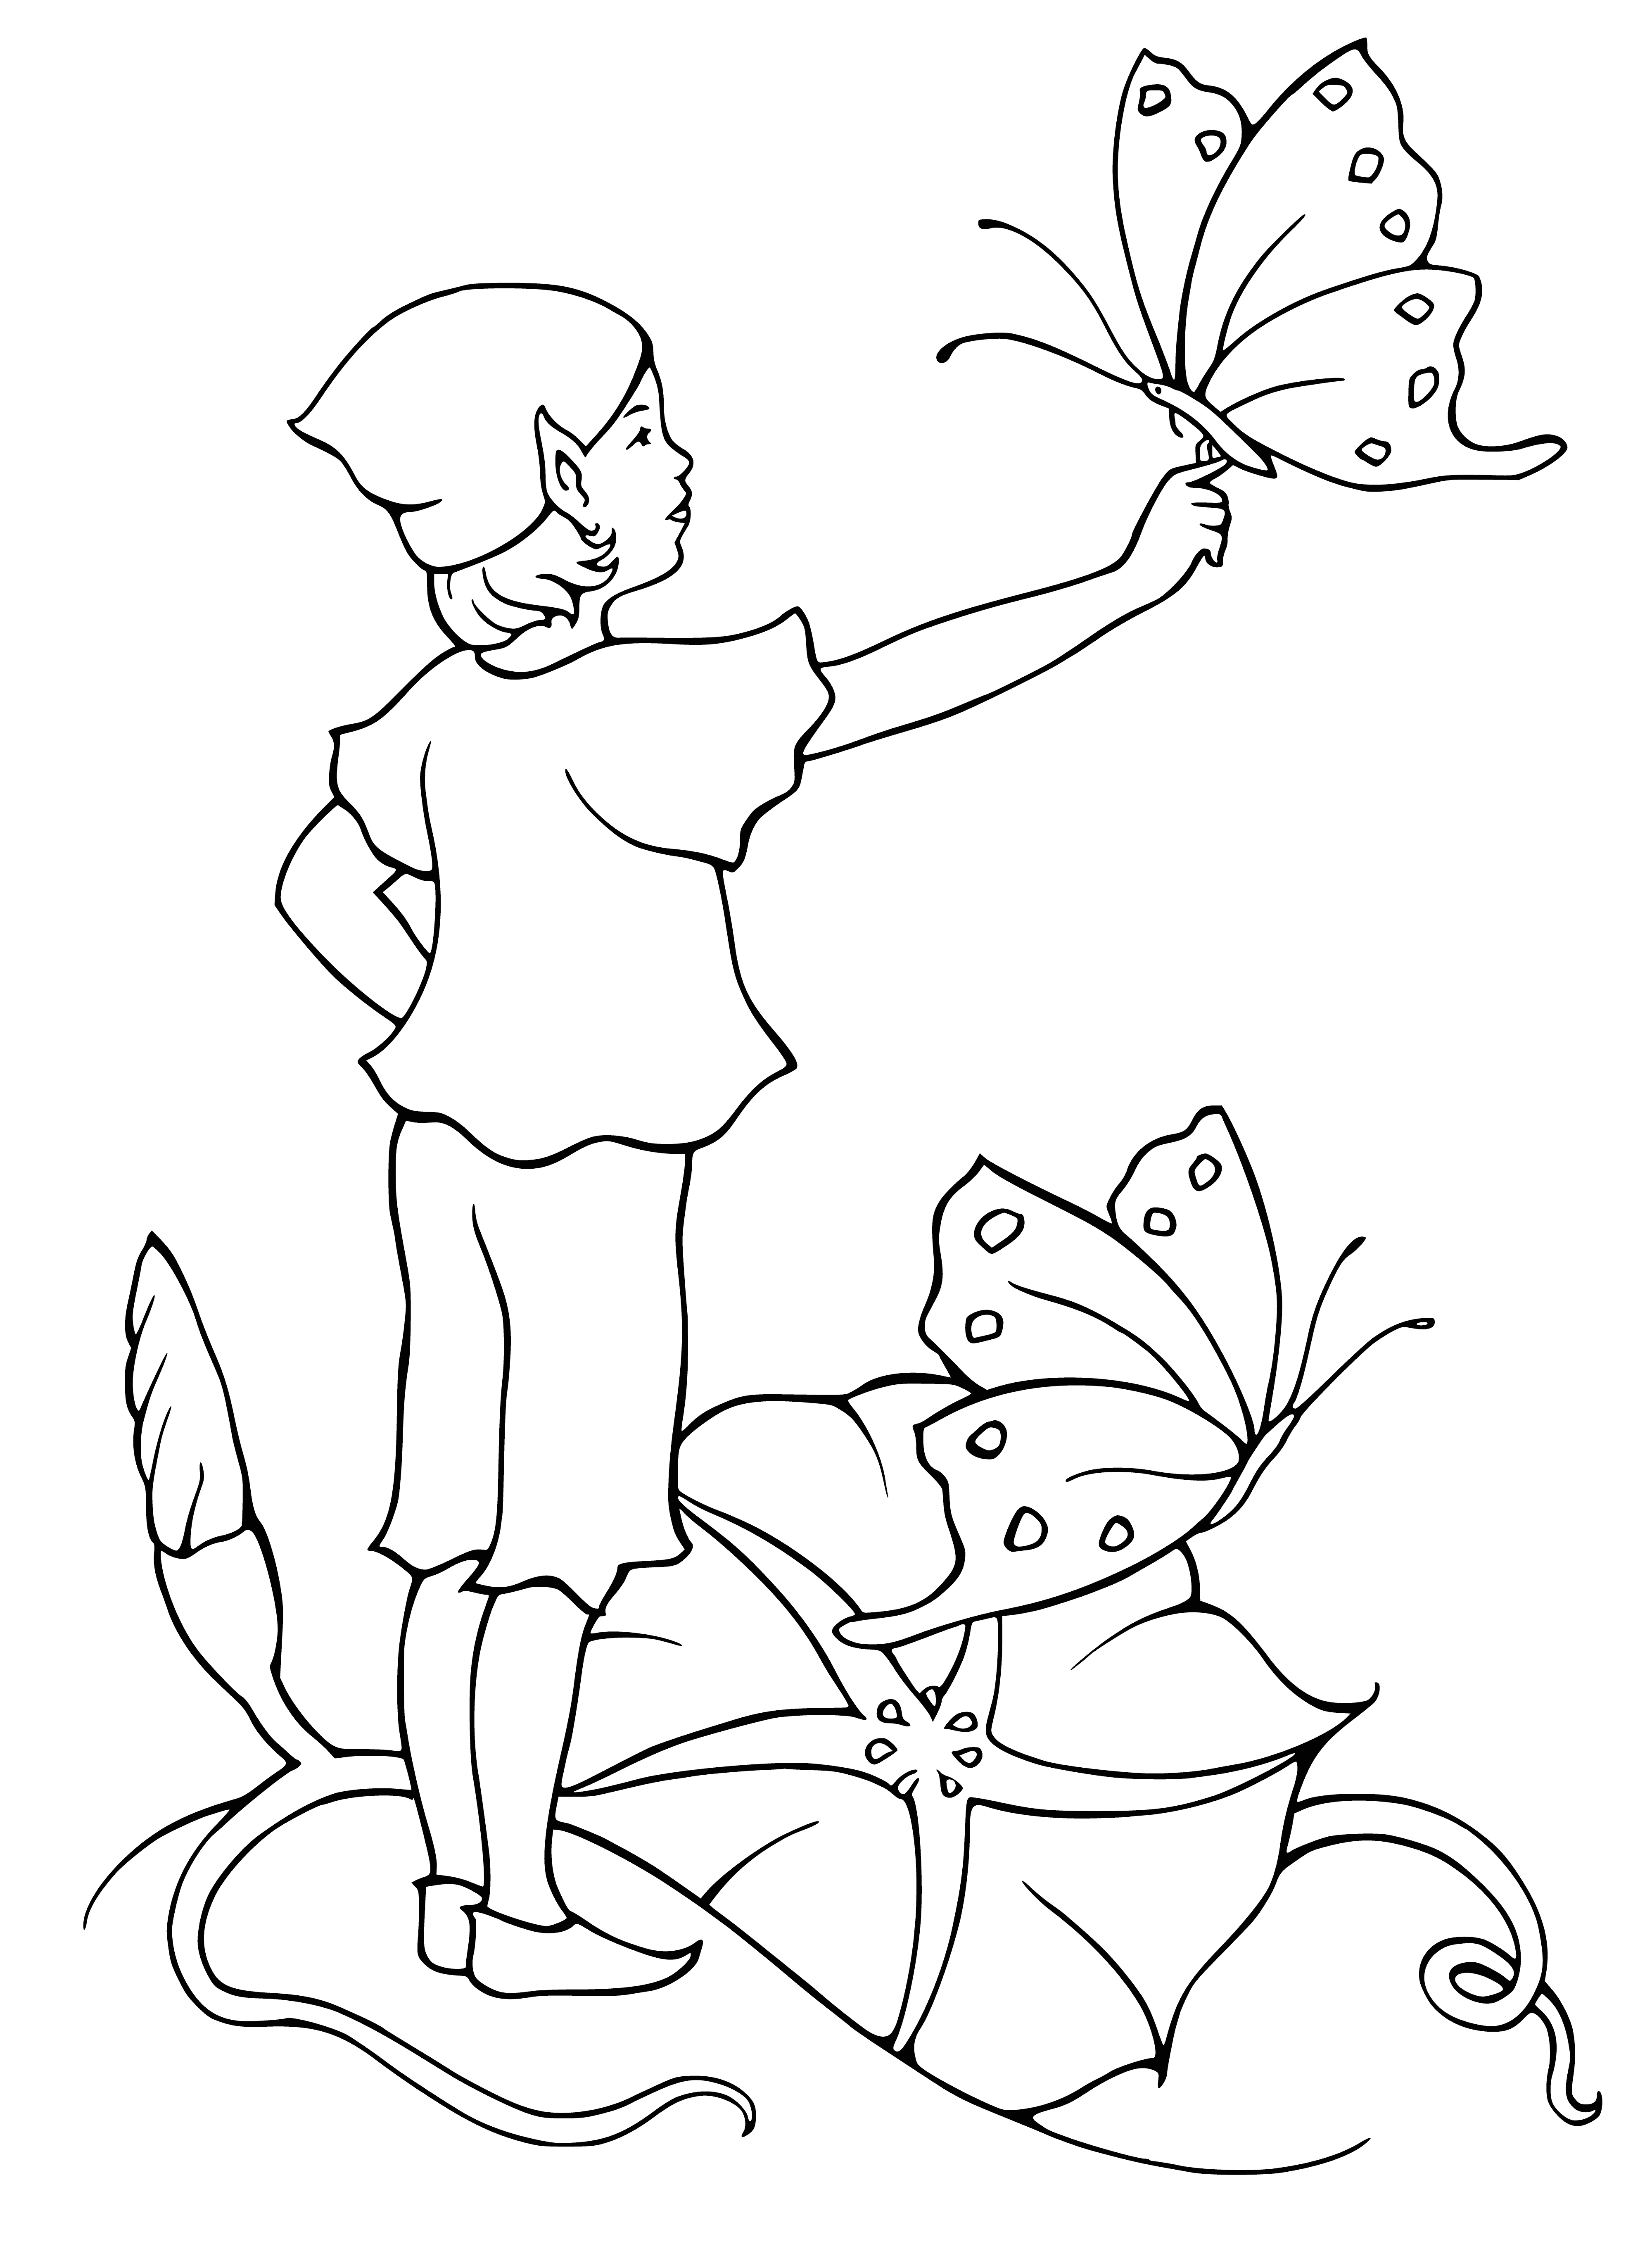 Elf and butterflies coloring page